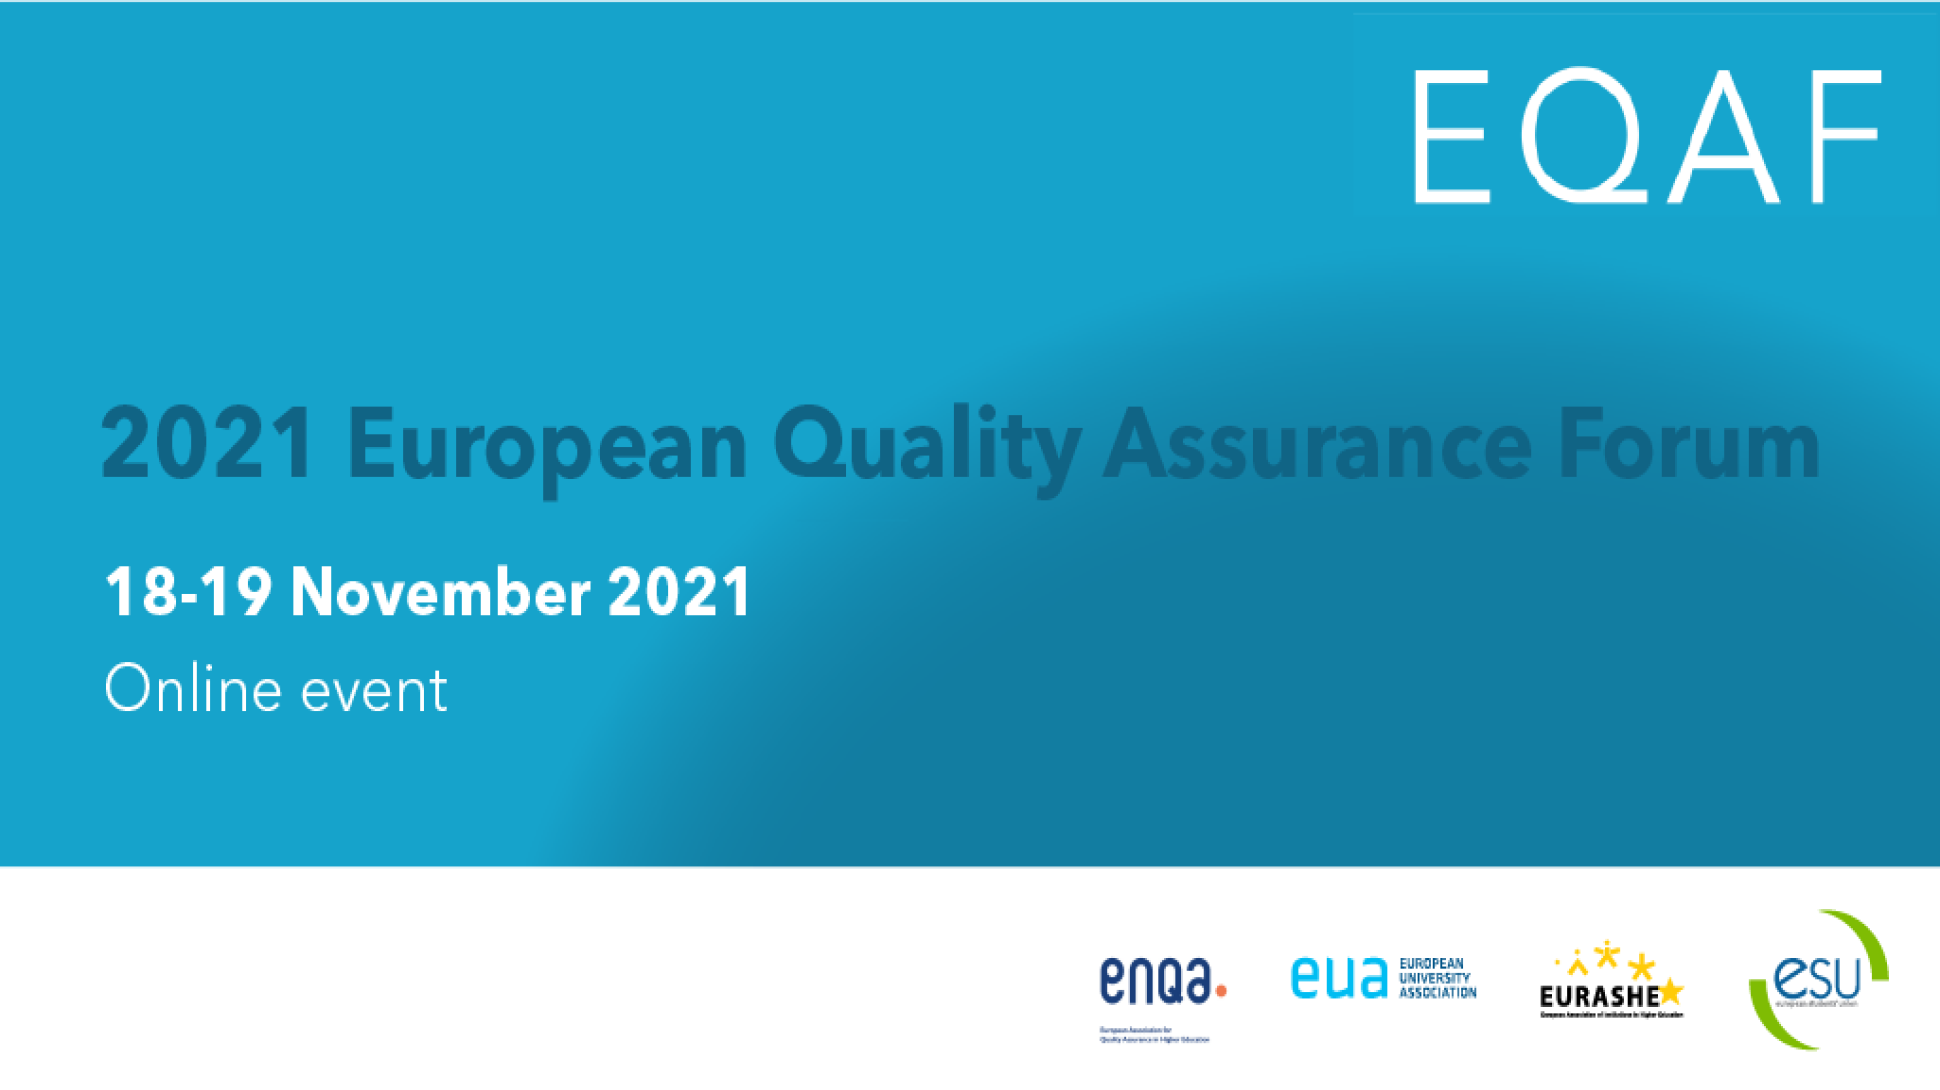 Representatives of CU actively participated at the European Quality Assurance Forum 2021